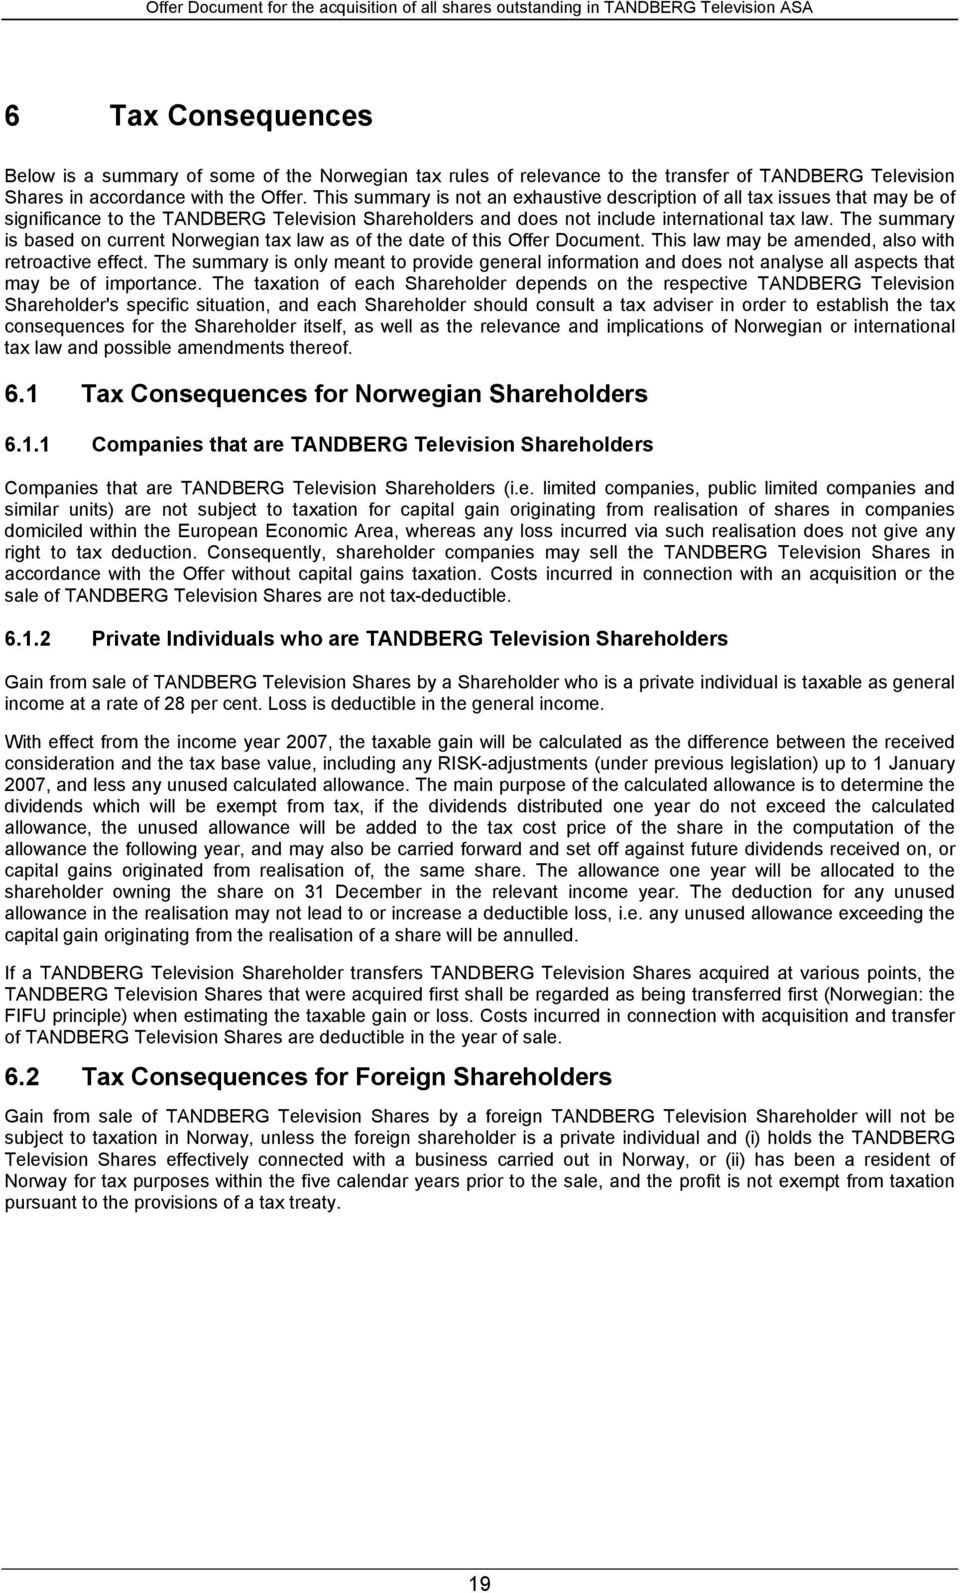 The summary is based on current Norwegian tax law as of the date of this Offer Document. This law may be amended, also with retroactive effect.